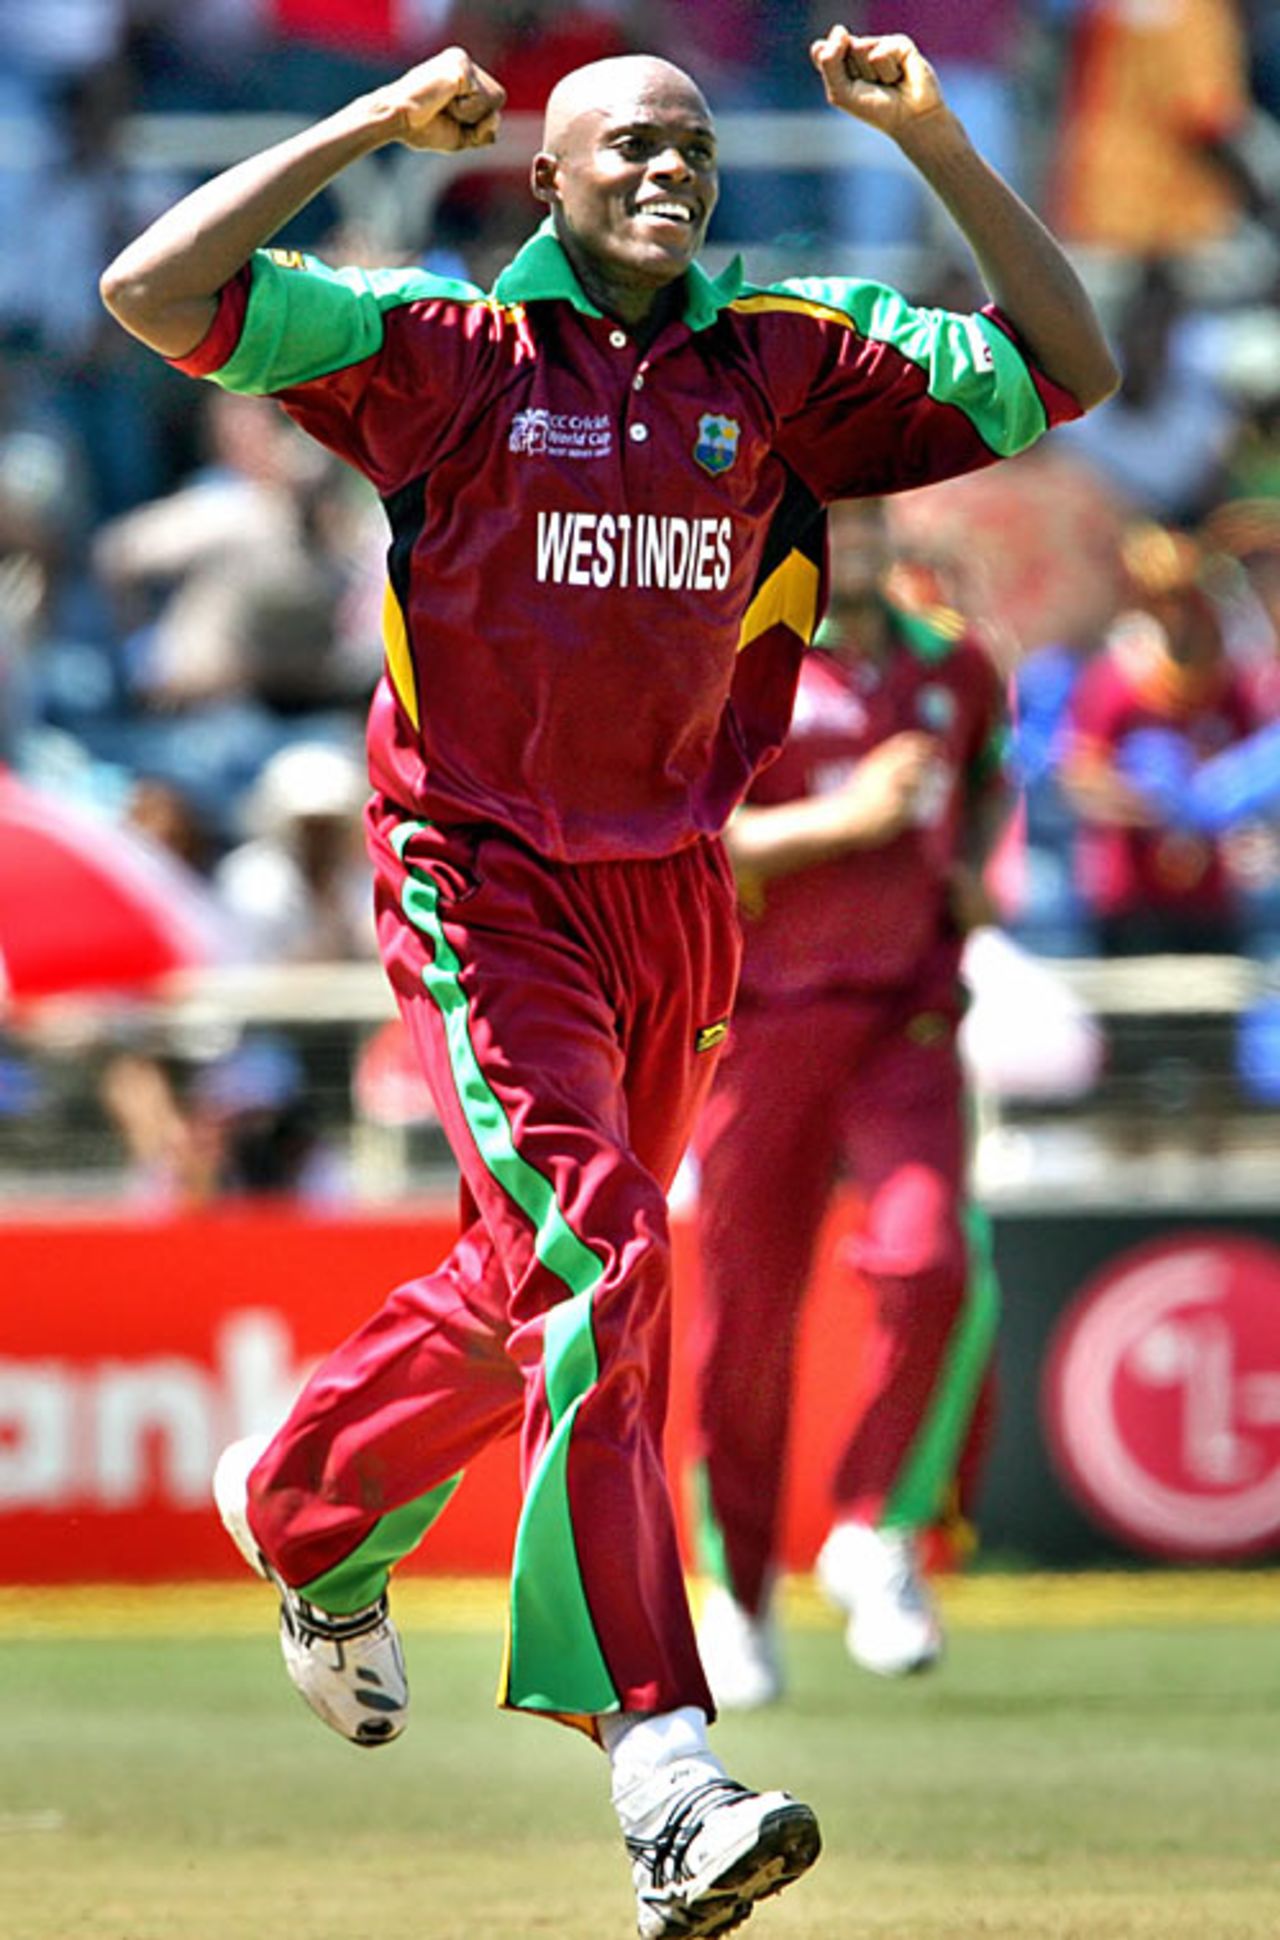 Daren Powell celebrates the wicket of Eoin Morgan, West Indies v Ireland, Group D, Kingston, March 23, 2007